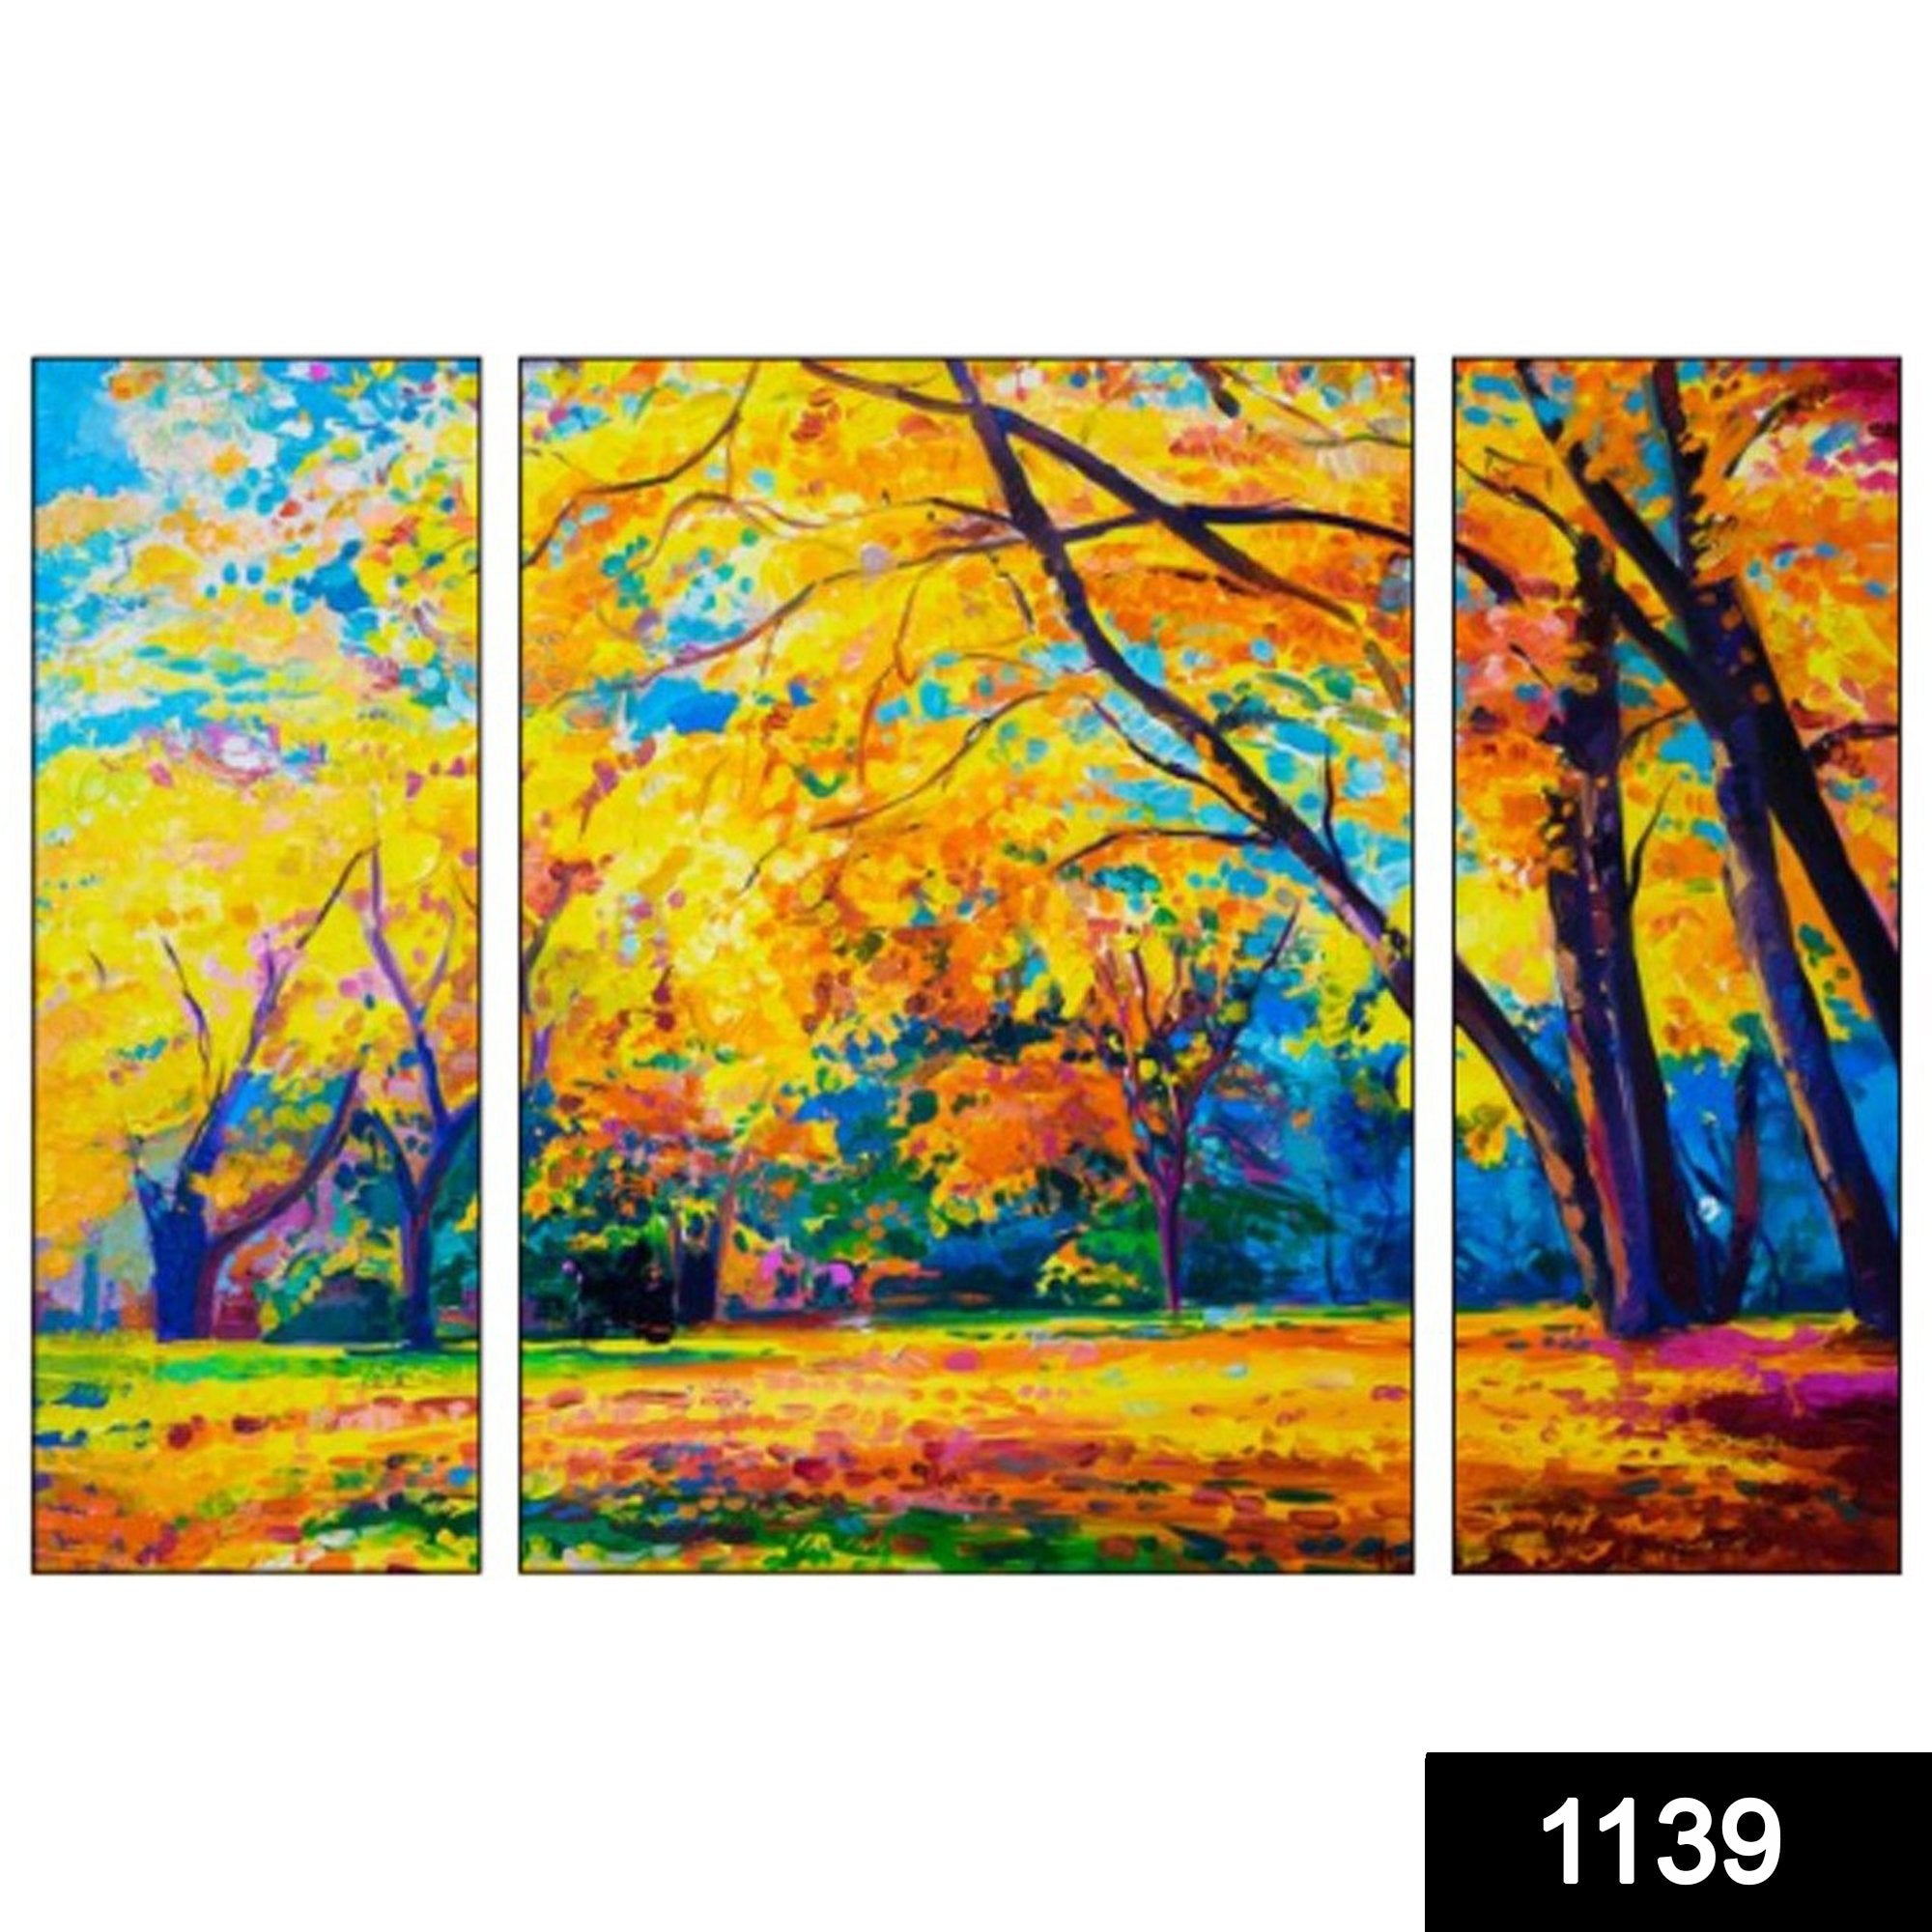 1139 3 Pcs Multicolor Wooden Floral Design For Wall Art - SkyShopy